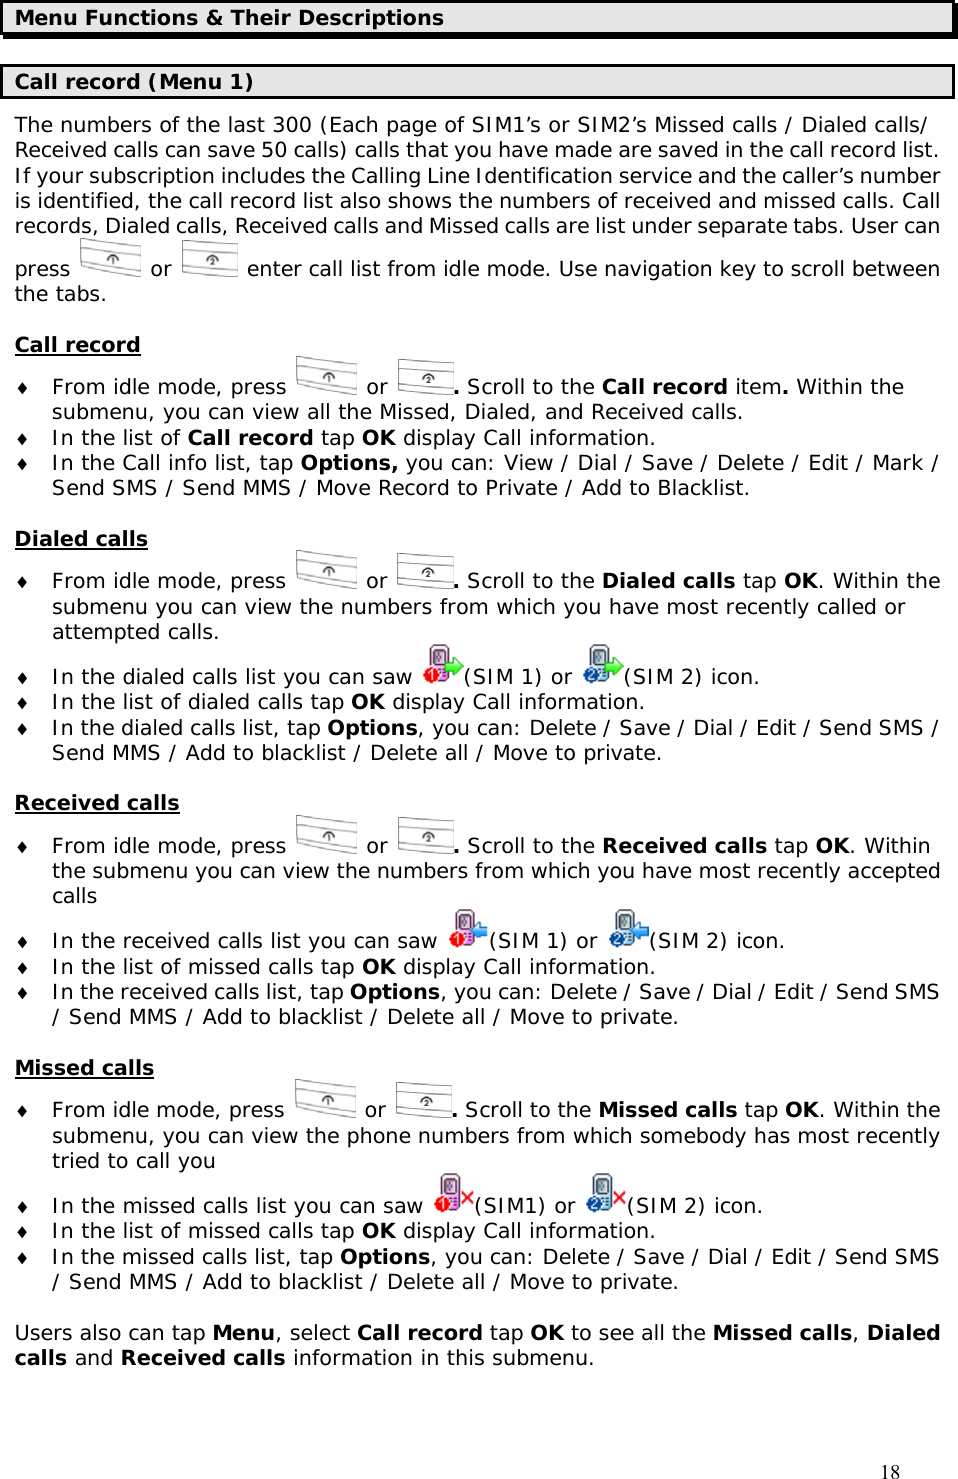                                     18 Menu Functions &amp; Their Descriptions Call record (Menu 1) The numbers of the last 300 (Each page of SIM1’s or SIM2’s Missed calls / Dialed calls/ Received calls can save 50 calls) calls that you have made are saved in the call record list. If your subscription includes the Calling Line Identification service and the caller’s number is identified, the call record list also shows the numbers of received and missed calls. Call records, Dialed calls, Received calls and Missed calls are list under separate tabs. User can press   or   enter call list from idle mode. Use navigation key to scroll between the tabs.  Call record ♦ From idle mode, press   or  . Scroll to the Call record item. Within the submenu, you can view all the Missed, Dialed, and Received calls. ♦ In the list of Call record tap OK display Call information. ♦ In the Call info list, tap Options, you can: View / Dial / Save / Delete / Edit / Mark / Send SMS / Send MMS / Move Record to Private / Add to Blacklist.  Dialed calls ♦ From idle mode, press   or  . Scroll to the Dialed calls tap OK. Within the submenu you can view the numbers from which you have most recently called or attempted calls. ♦ In the dialed calls list you can saw  (SIM 1) or  (SIM 2) icon. ♦ In the list of dialed calls tap OK display Call information. ♦ In the dialed calls list, tap Options, you can: Delete / Save / Dial / Edit / Send SMS / Send MMS / Add to blacklist / Delete all / Move to private.  Received calls ♦ From idle mode, press   or  . Scroll to the Received calls tap OK. Within the submenu you can view the numbers from which you have most recently accepted calls ♦ In the received calls list you can saw  (SIM 1) or  (SIM 2) icon. ♦ In the list of missed calls tap OK display Call information. ♦ In the received calls list, tap Options, you can: Delete / Save / Dial / Edit / Send SMS / Send MMS / Add to blacklist / Delete all / Move to private.  Missed calls ♦ From idle mode, press   or  . Scroll to the Missed calls tap OK. Within the submenu, you can view the phone numbers from which somebody has most recently tried to call you ♦ In the missed calls list you can saw  (SIM1) or  (SIM 2) icon. ♦ In the list of missed calls tap OK display Call information. ♦ In the missed calls list, tap Options, you can: Delete / Save / Dial / Edit / Send SMS / Send MMS / Add to blacklist / Delete all / Move to private.  Users also can tap Menu, select Call record tap OK to see all the Missed calls, Dialed calls and Received calls information in this submenu.  